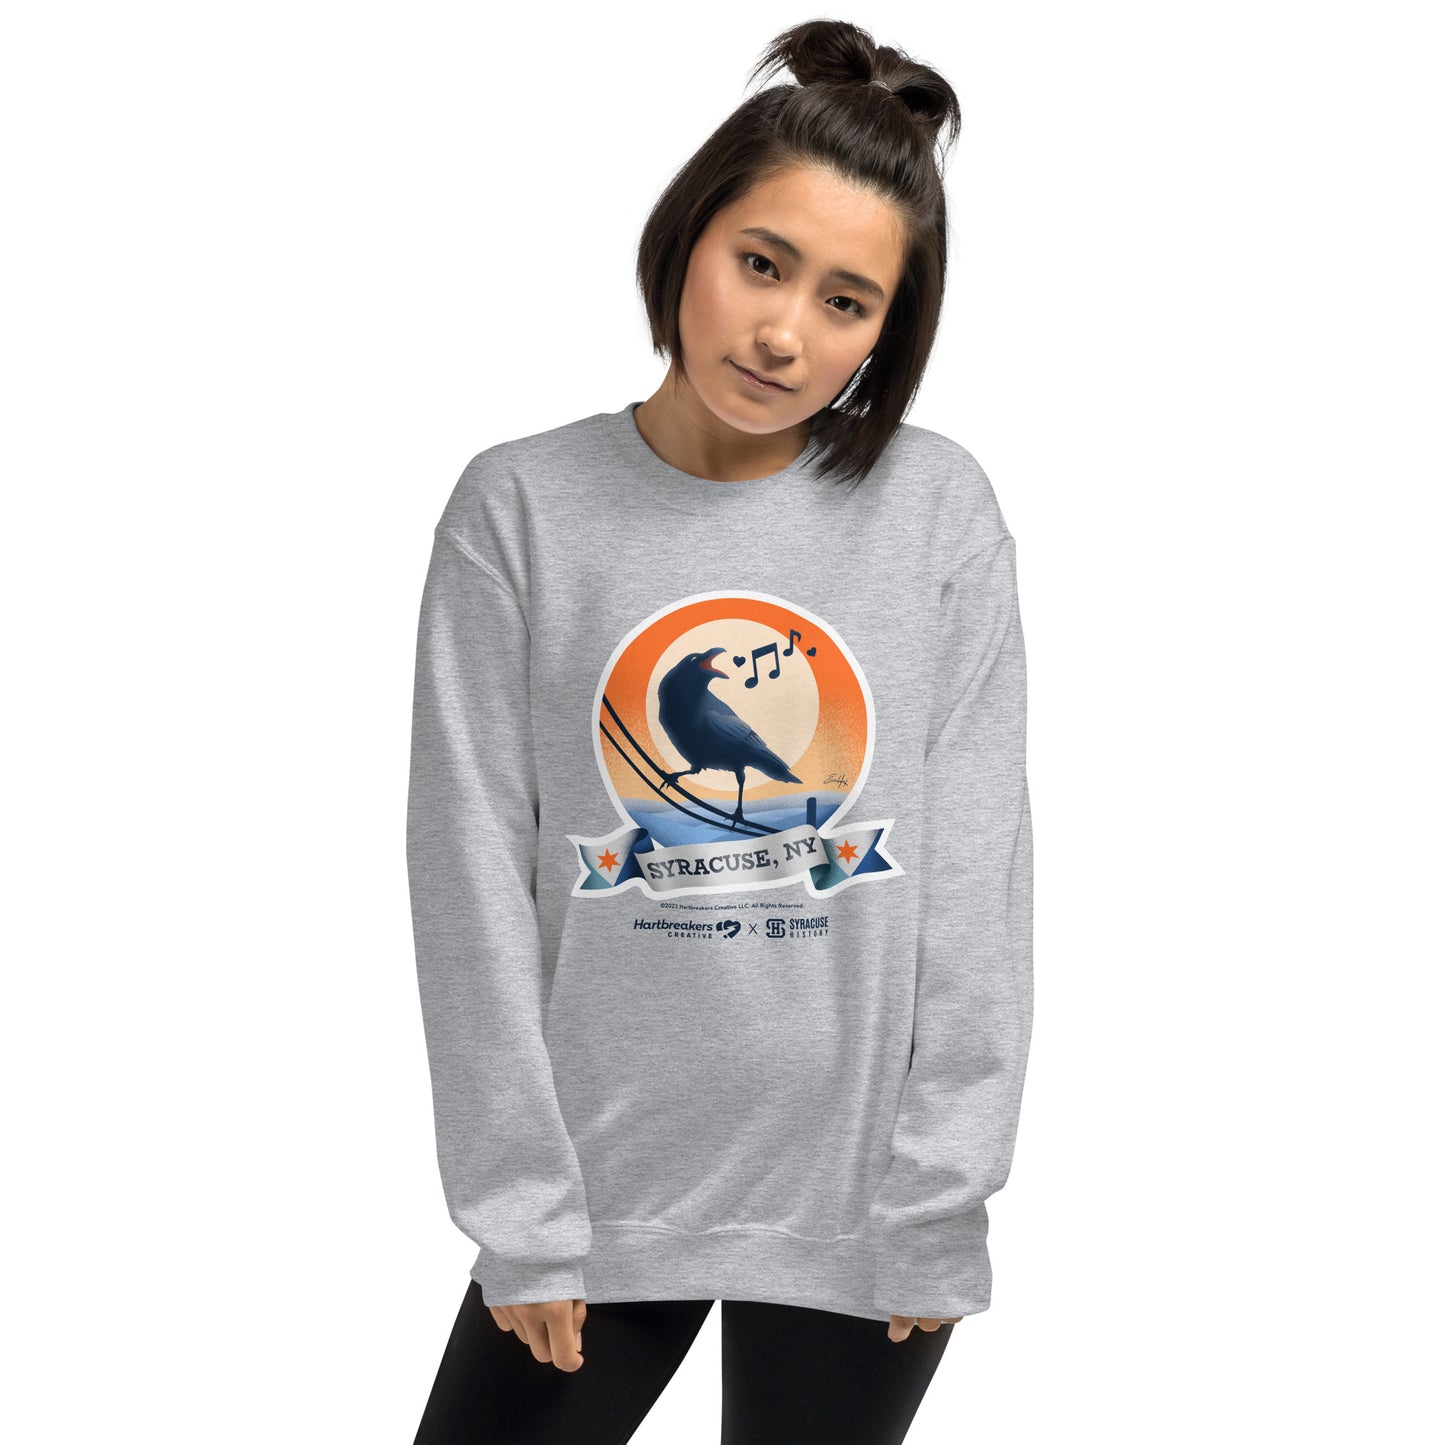 A woman wearing a sport grey sweatshirt featuring an illustration of a crow on a telephone wire and a banner beneath it that says Syracuse, NY